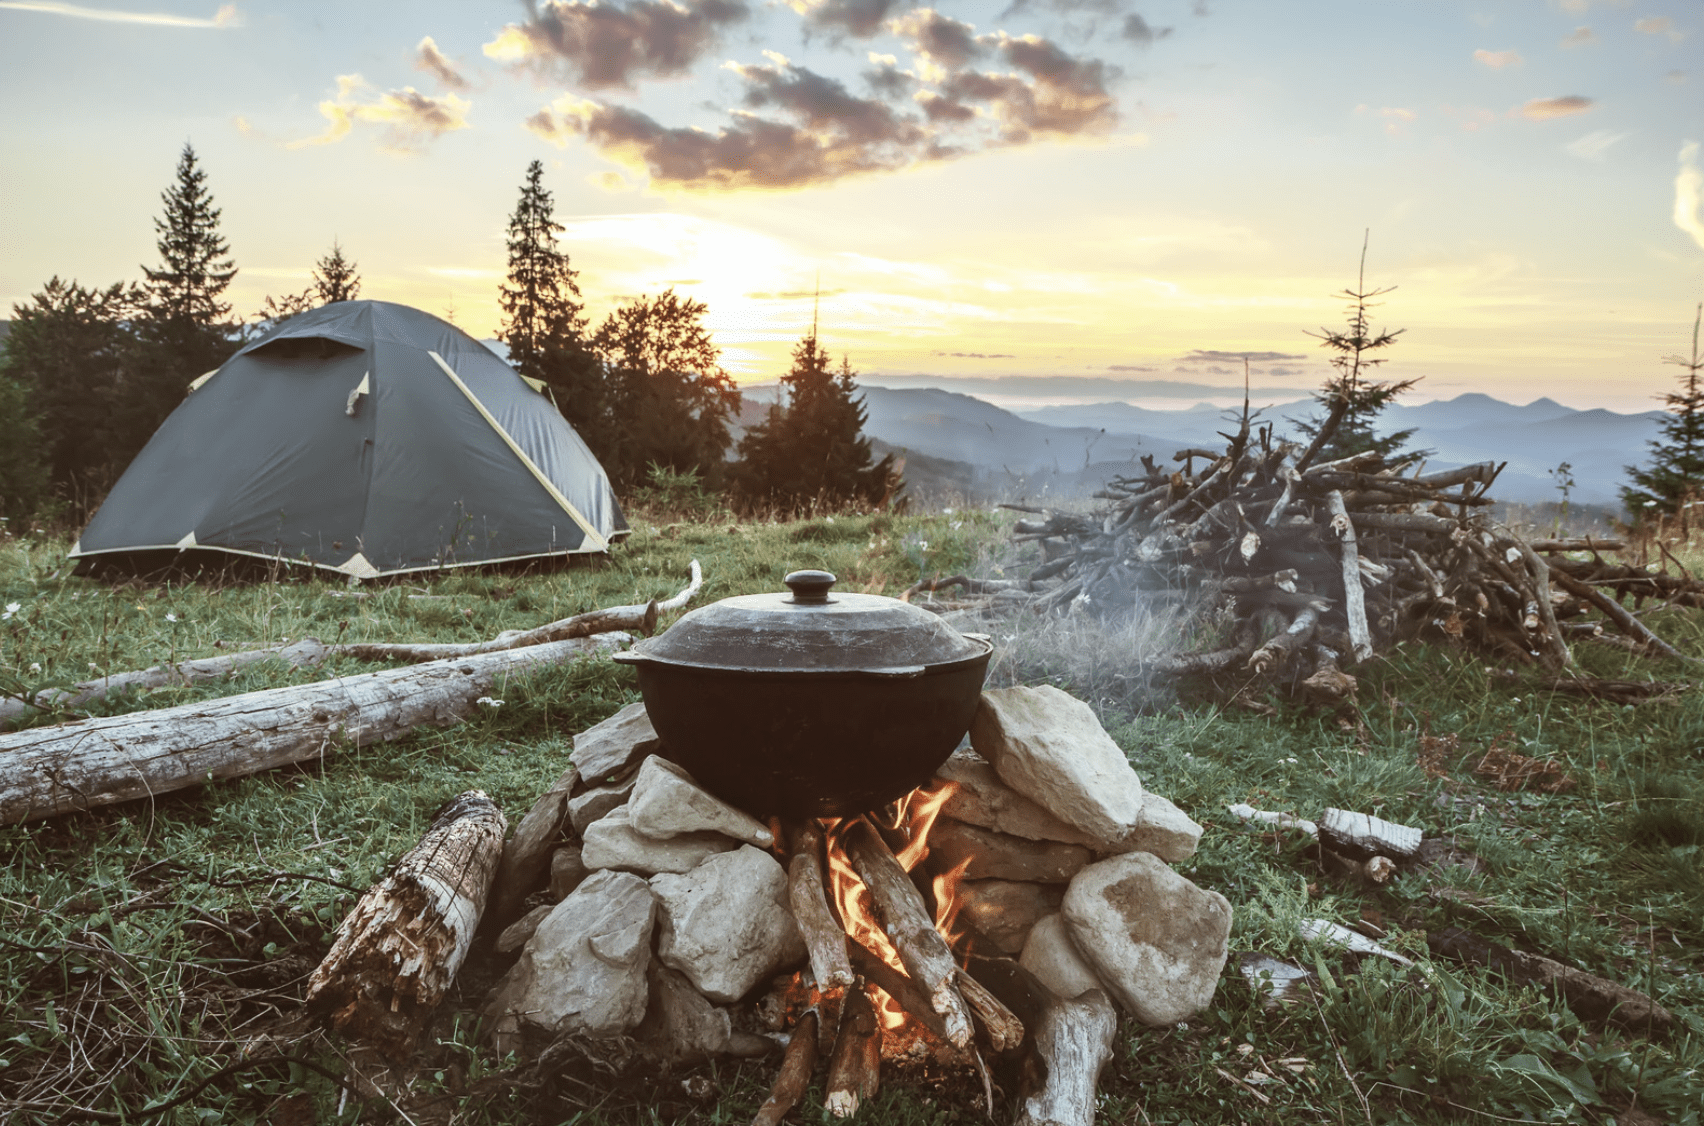 Top 5 Of The Best Portable Espresso Makers For Camping: Perfect For Your Next Outdoor Adventure